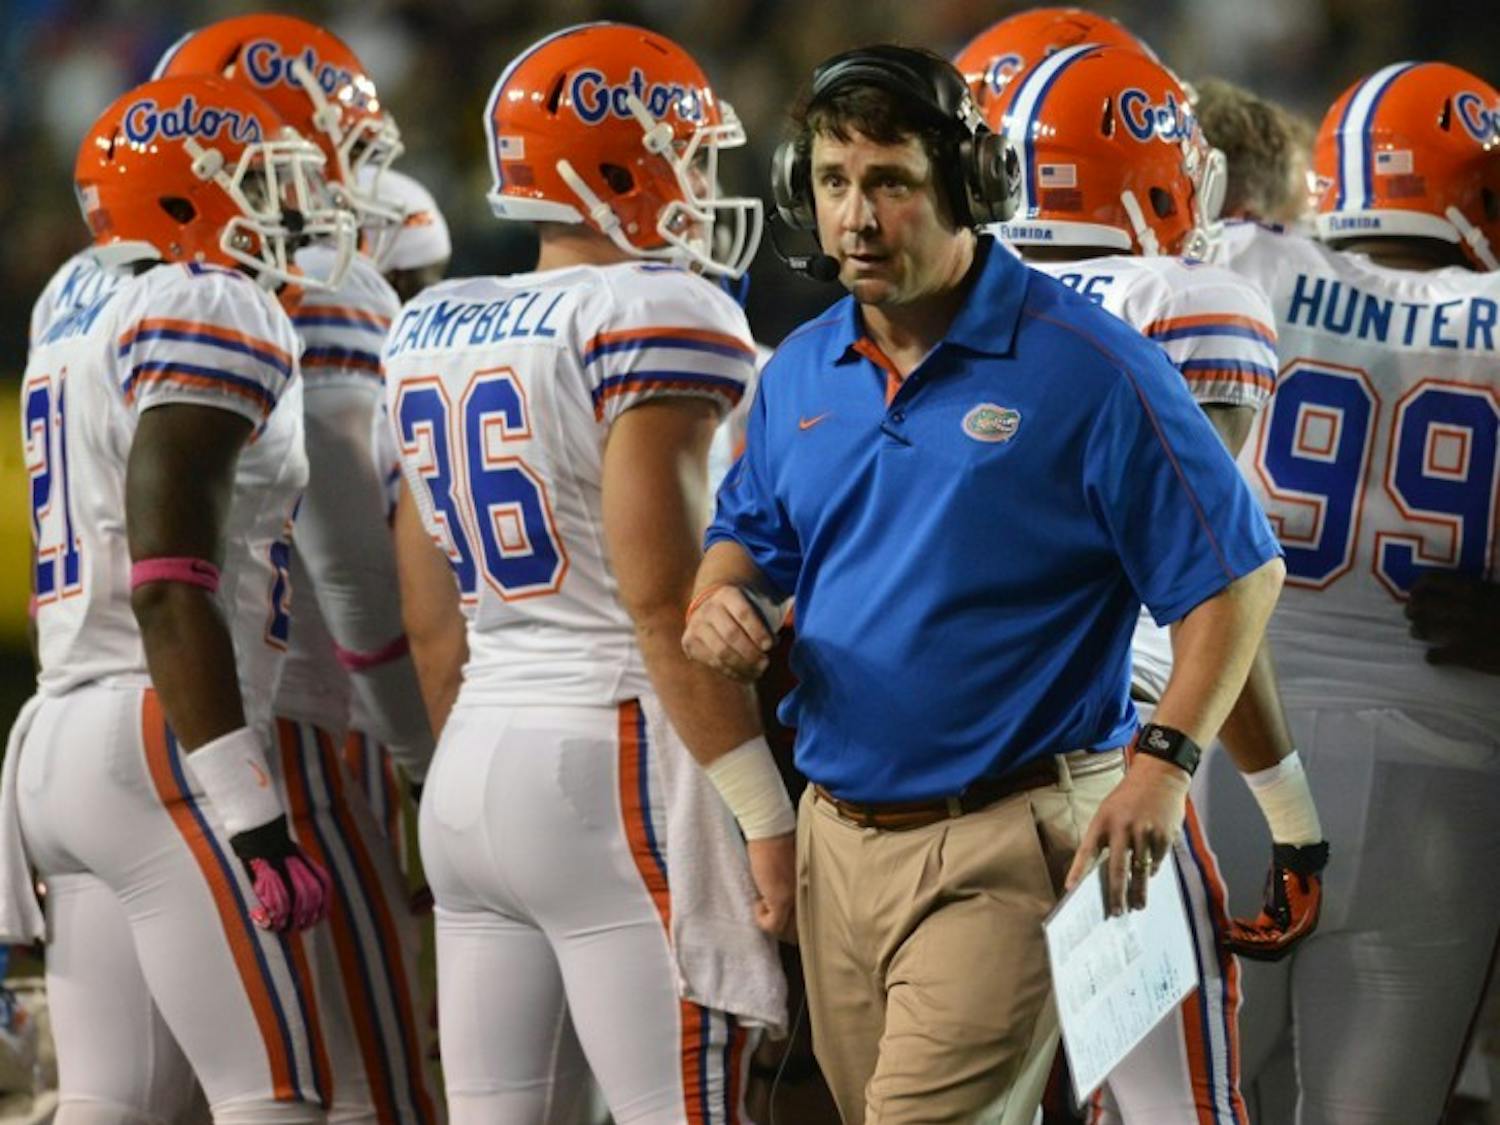 Coach Will Muschamp walks toward the sideline after a timeout against Vanderbilt on Saturday. Florida erased a first quarter deficit en route to a 16-point victory.